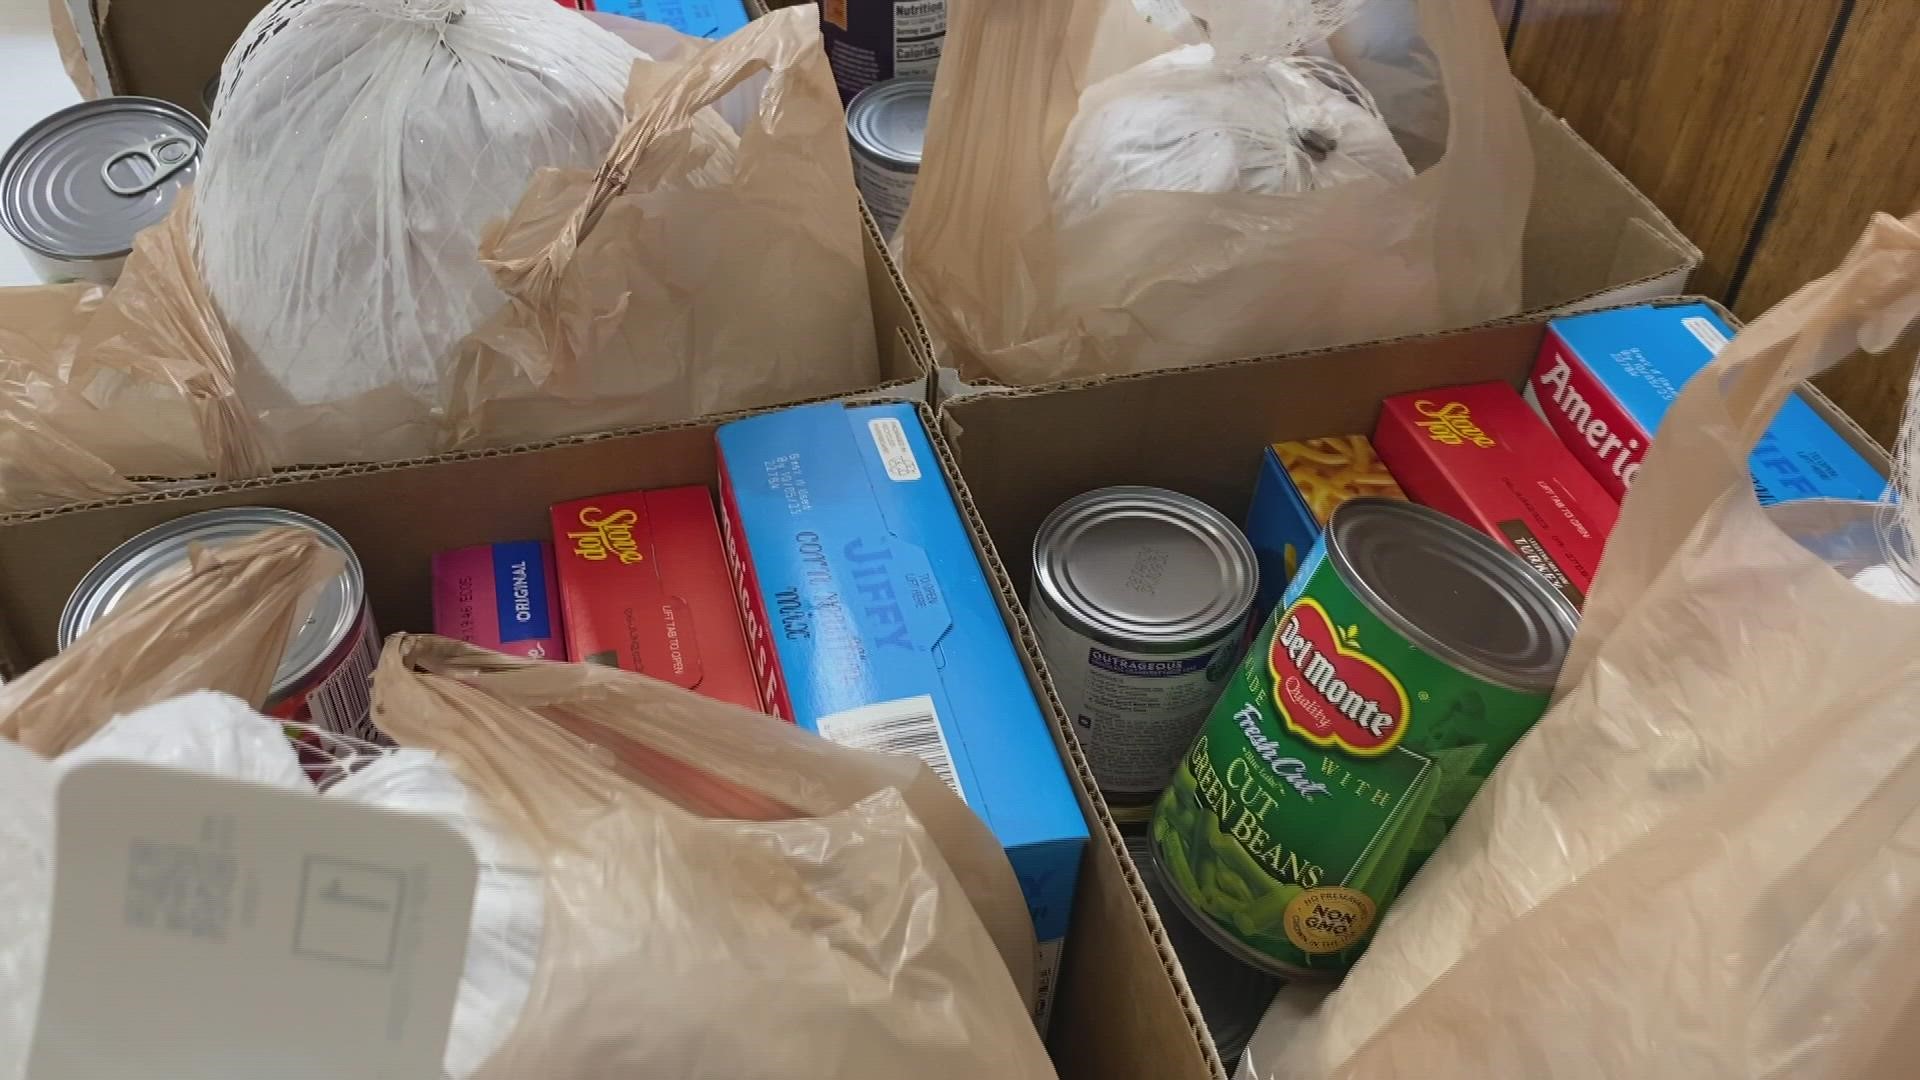 A Turkey, canned goods, gravy, stuffing were a part of the assorted goods they gave away.